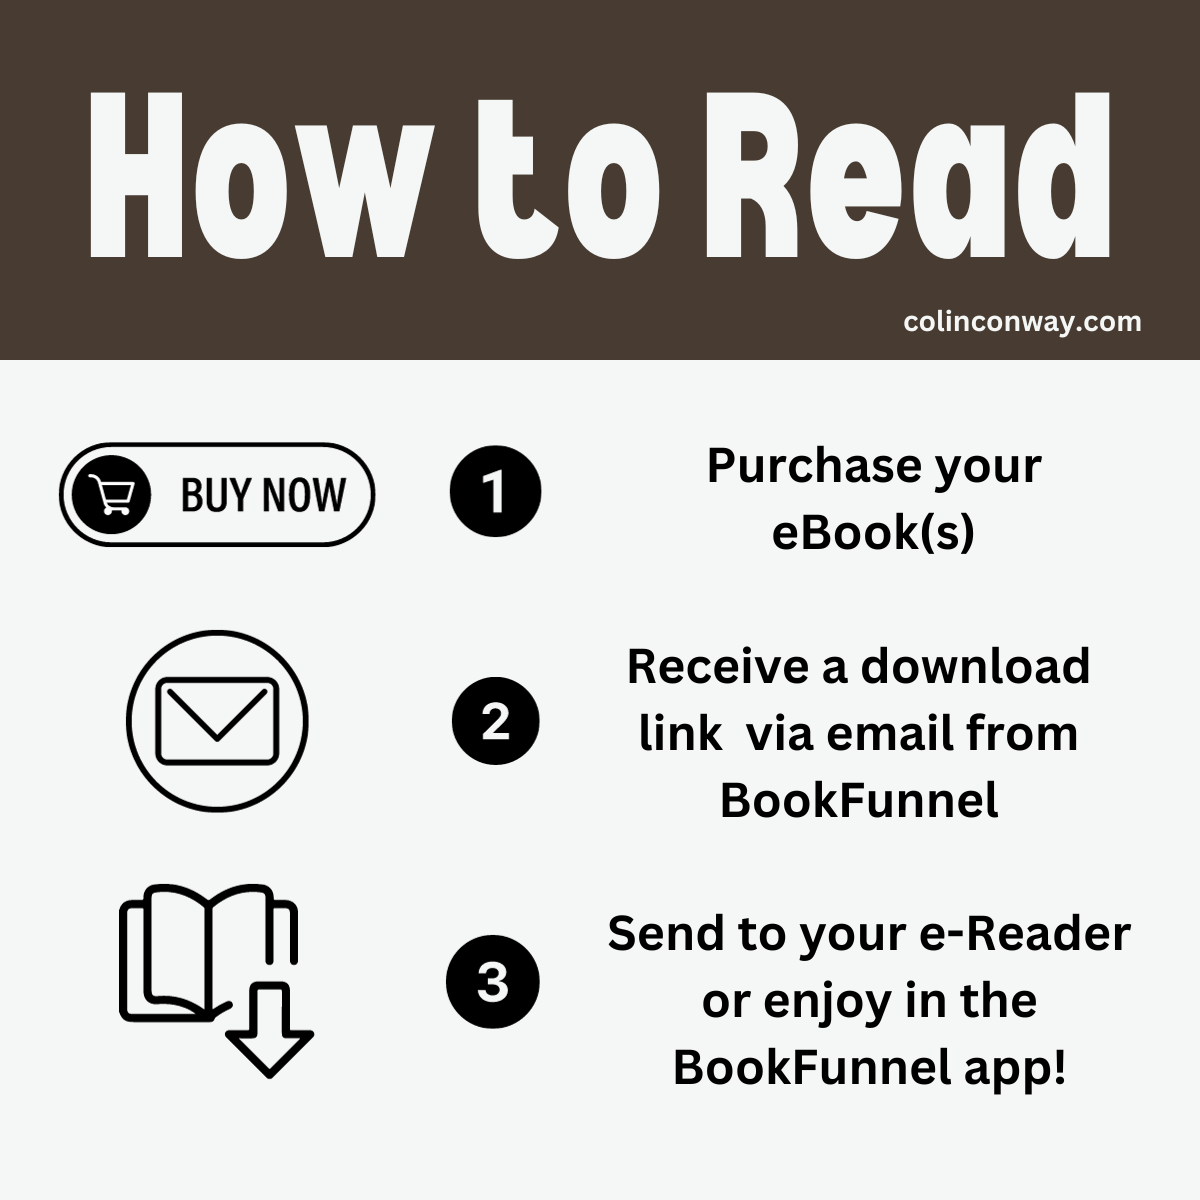 Wondering how to download your books? Use this handy diagram to enjoy the latest Colin Conway crime fiction novel.